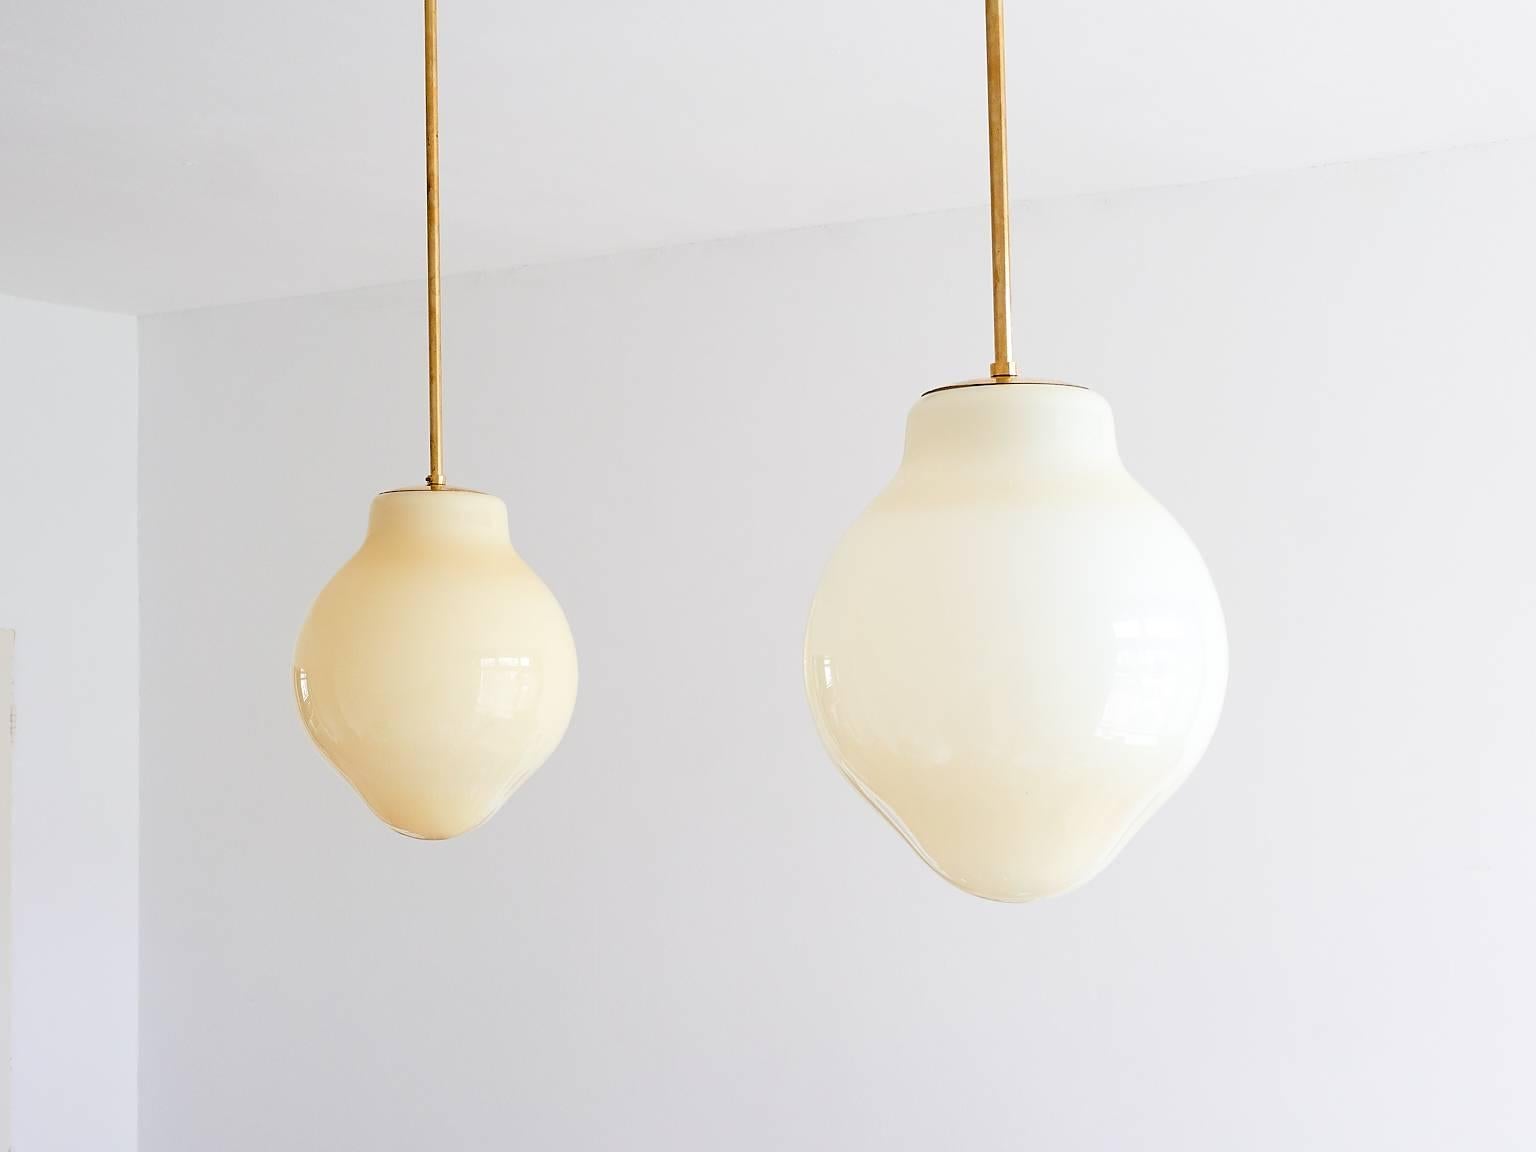 Brass Pair of Paavo Tynell Pendants, Model 1092, Taito Oy Finland, 1950s